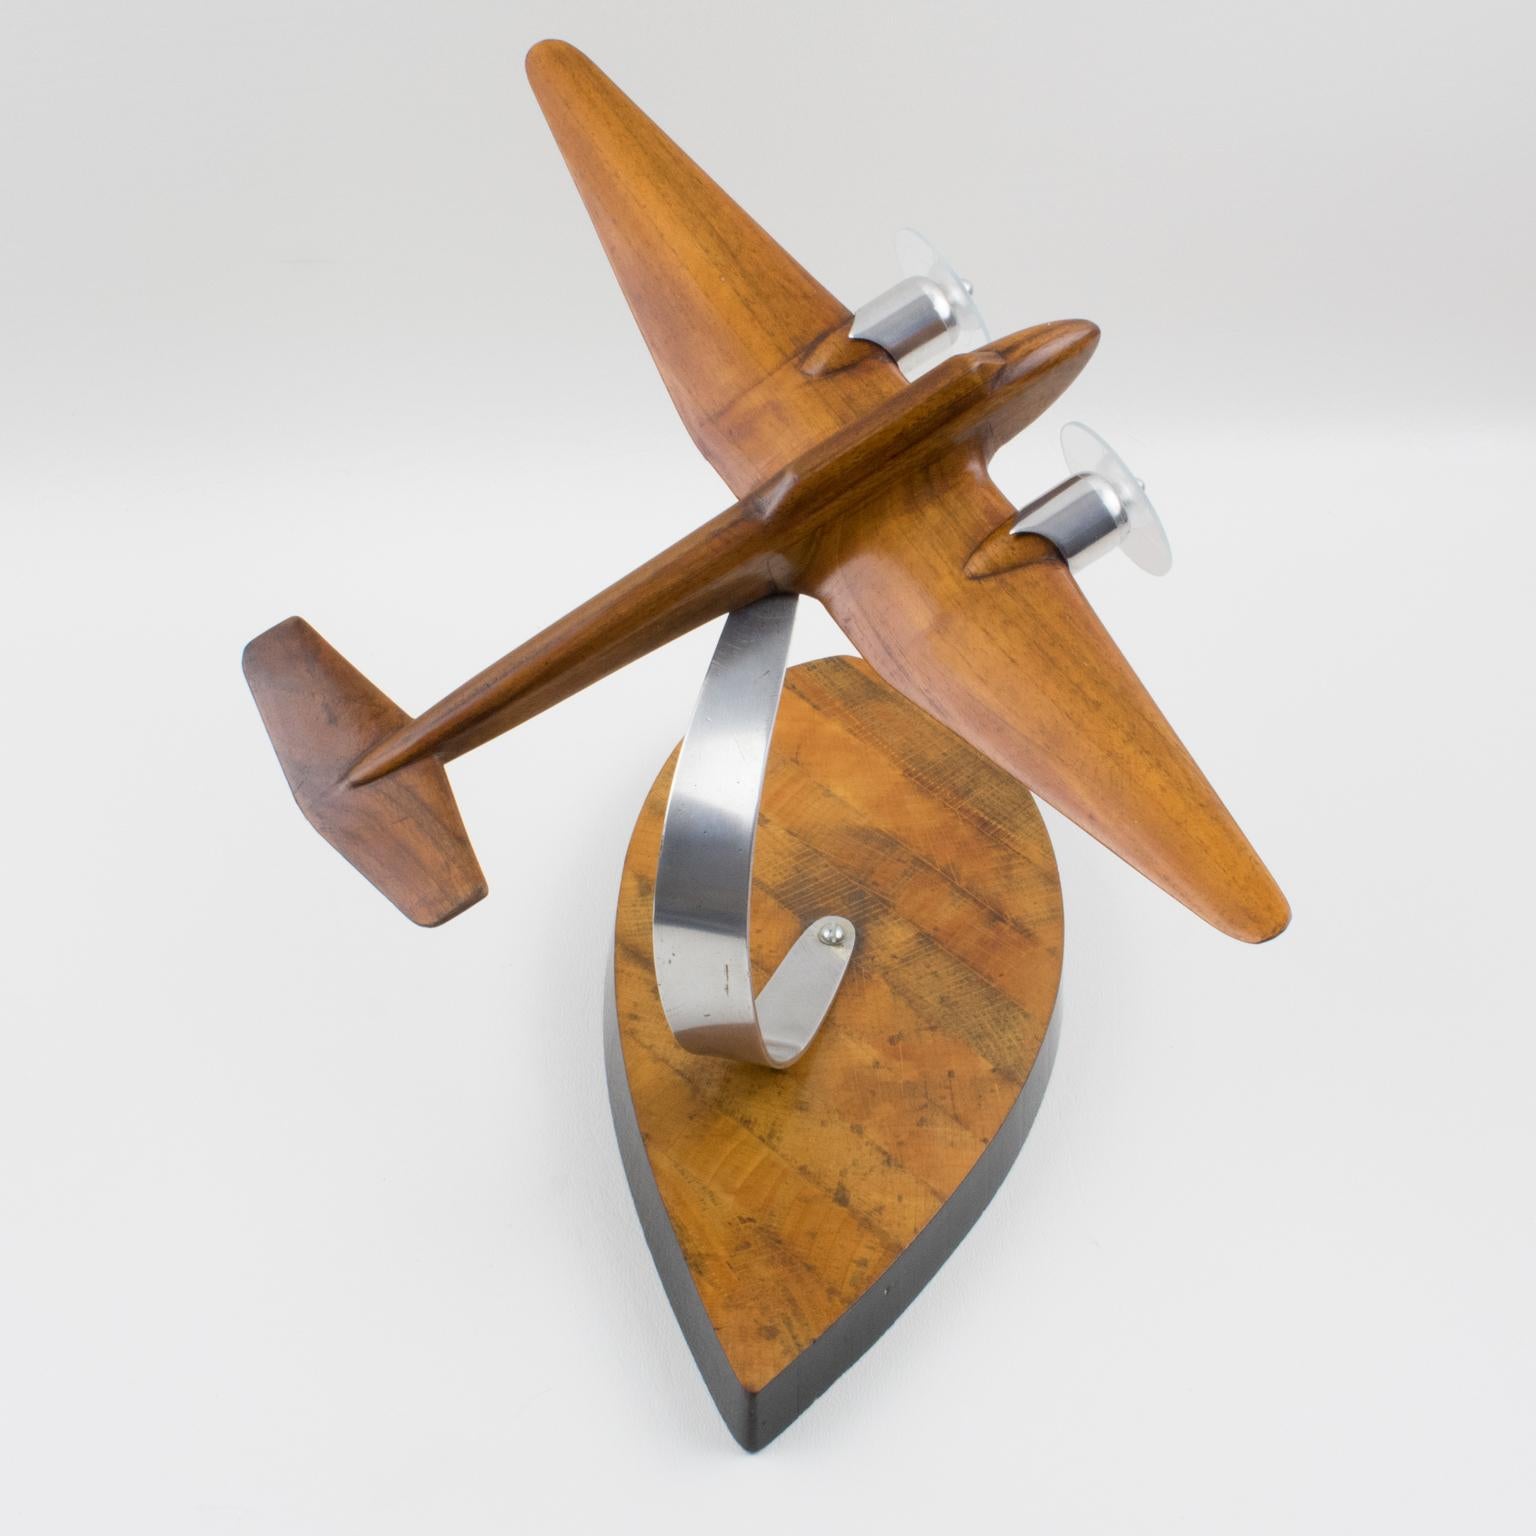 French Art Deco, 1940s Wooden and Aluminum Airplane Aviation Model 8